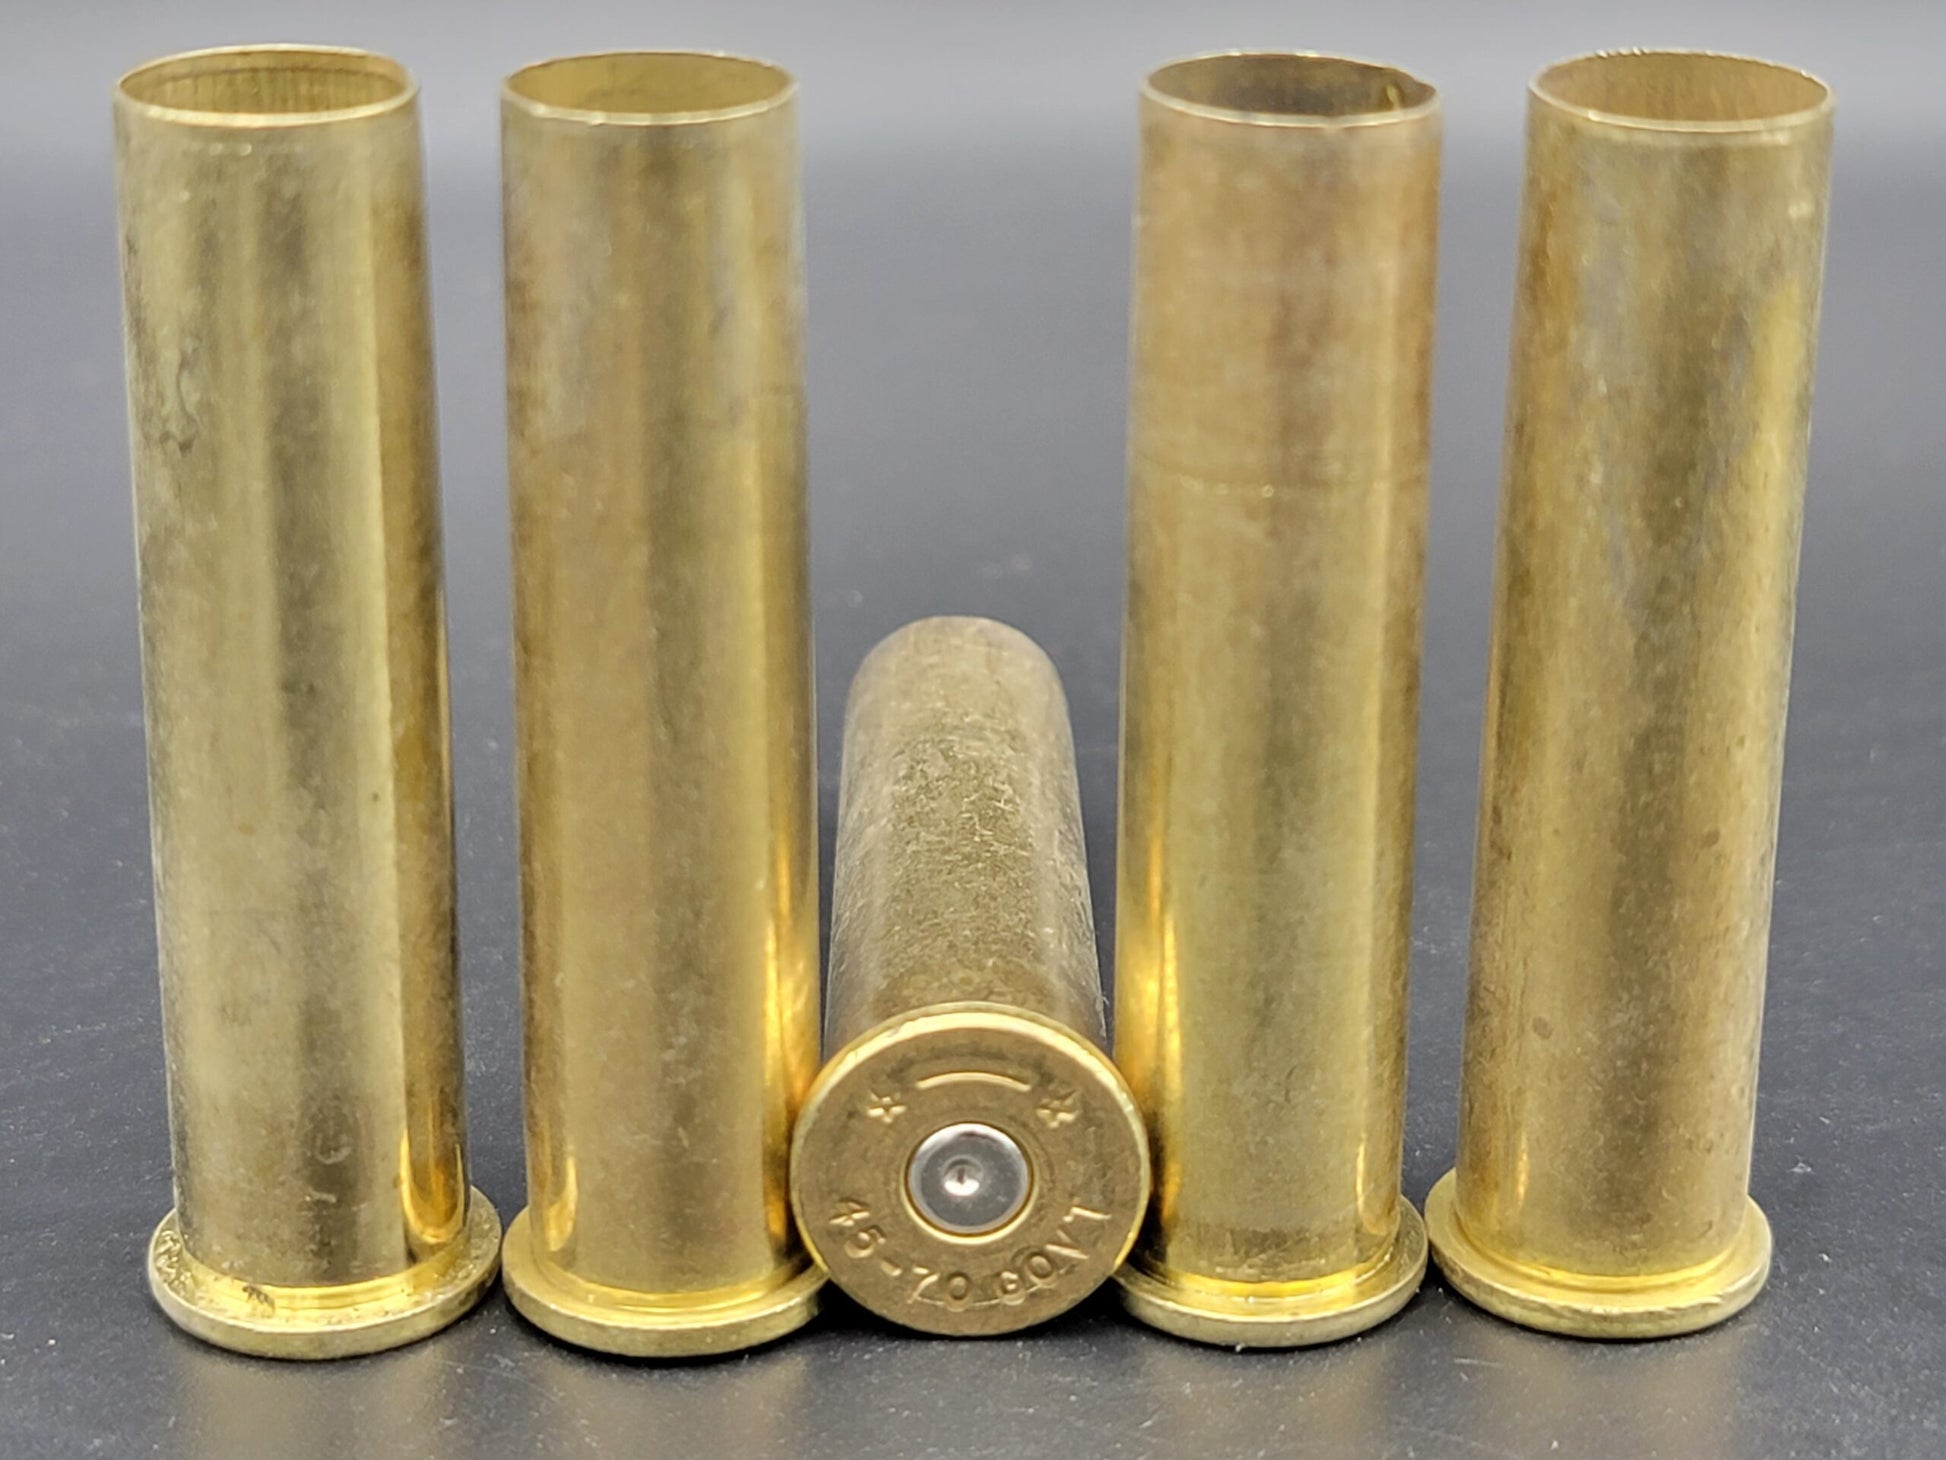 45-70 Gov't once fired rifle brass. Hand sorted from reputable indoor/military ranges for reloading. Reliable spent casings for precision shooting.